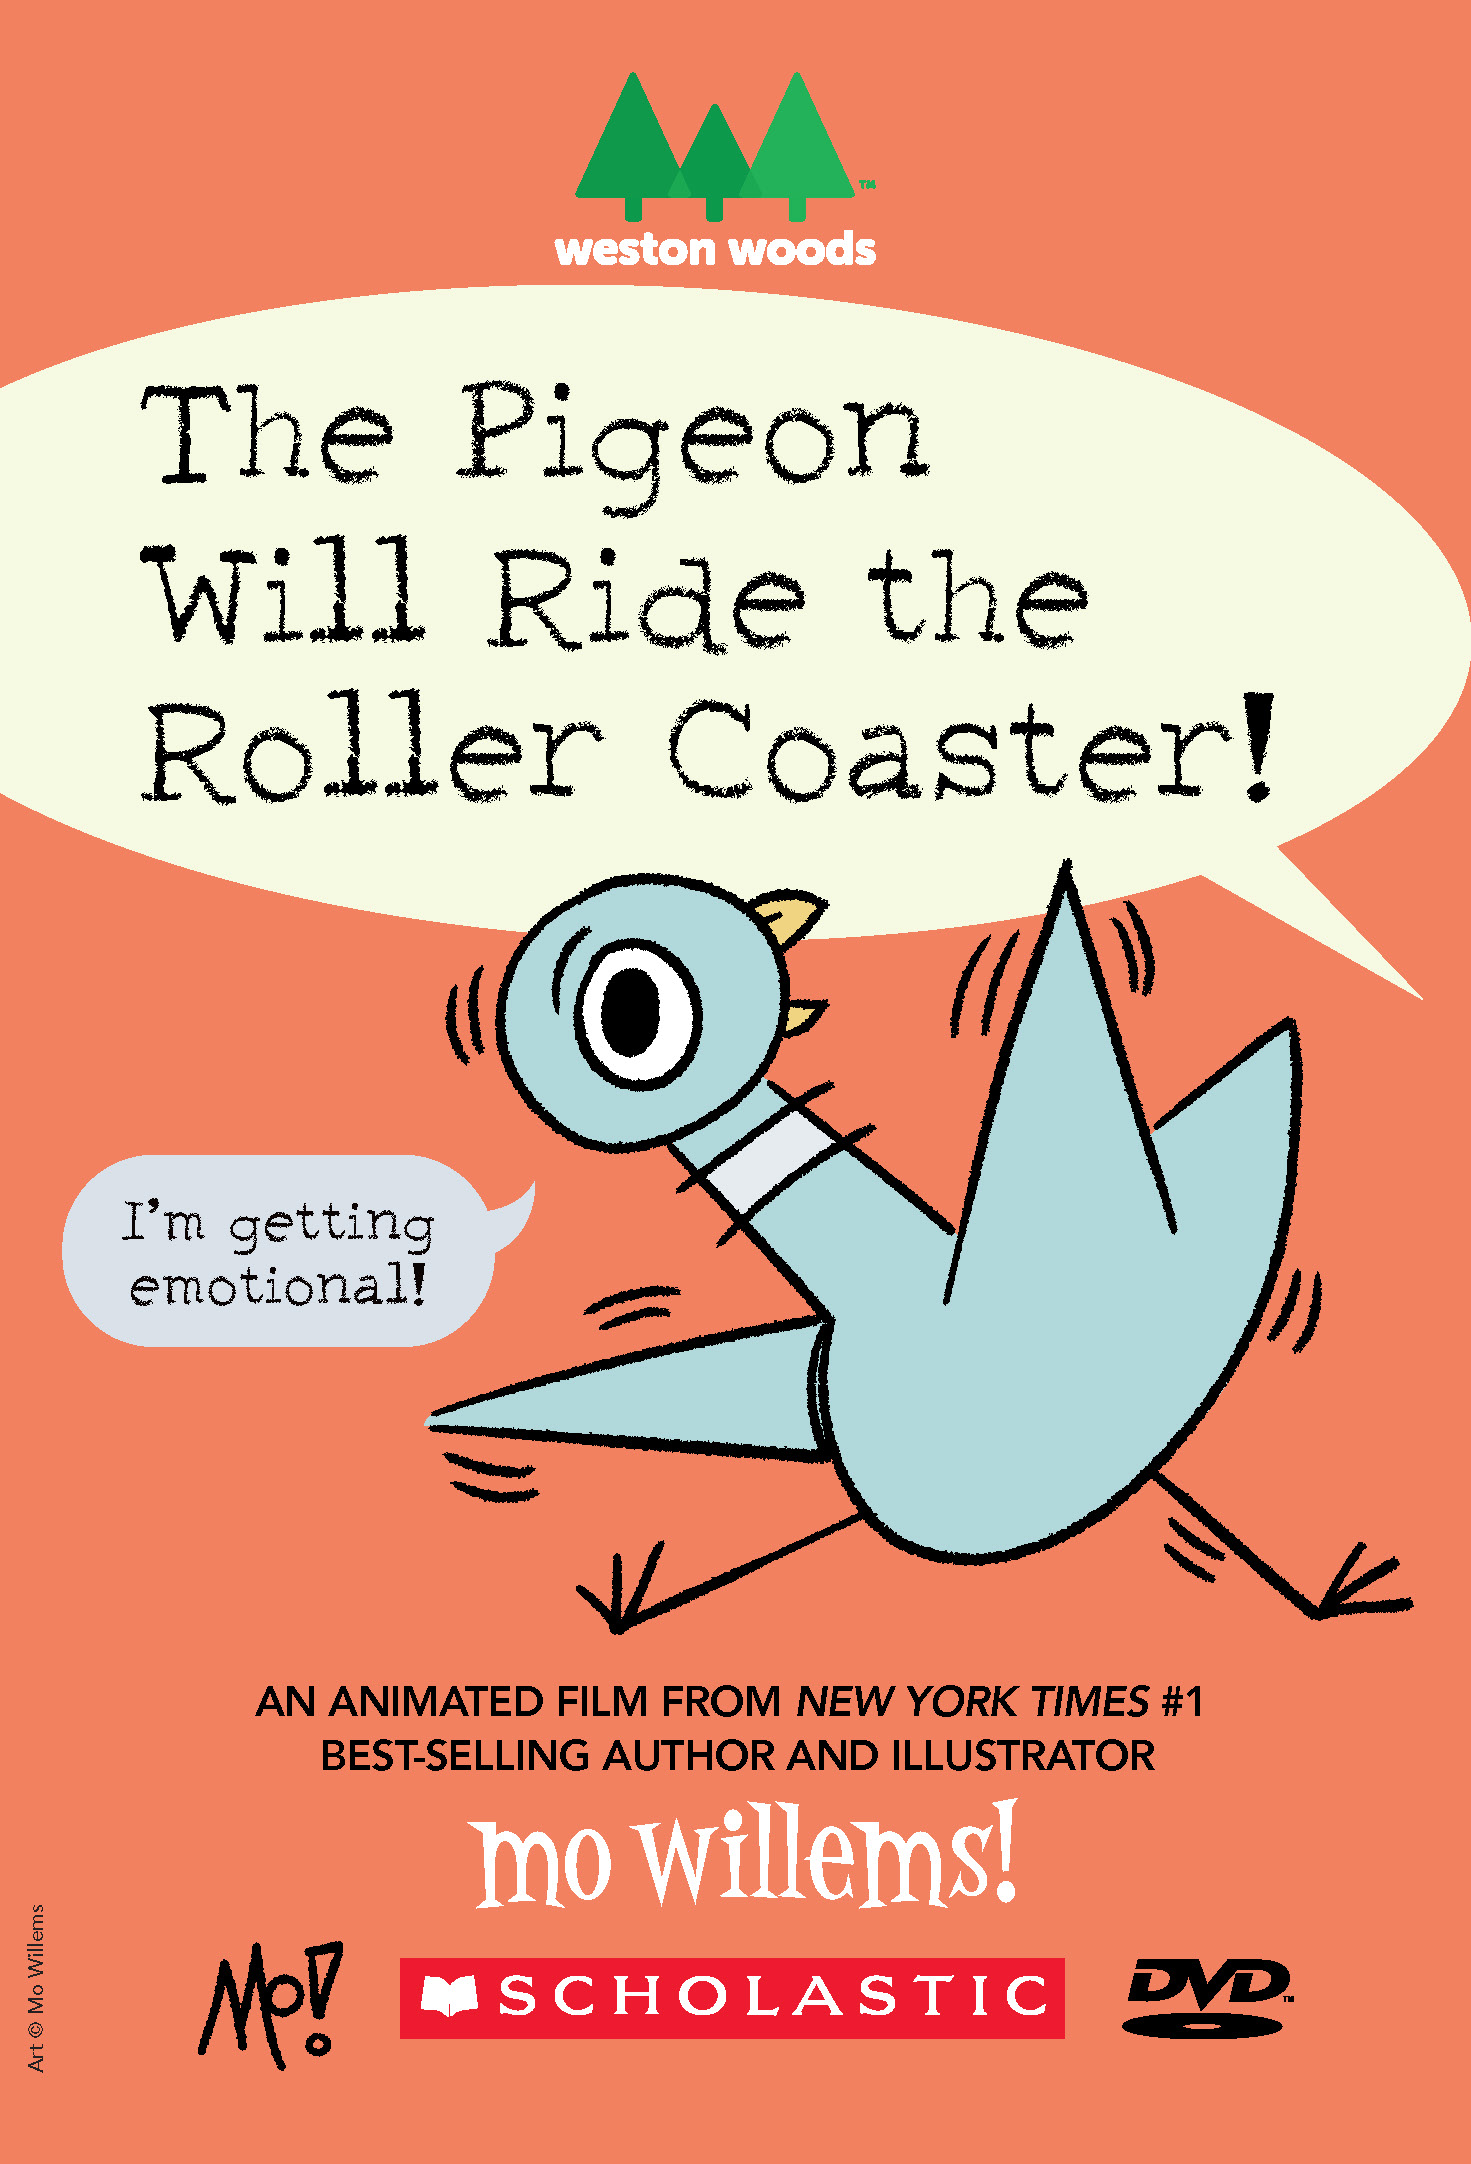 The Pigeon Will Ride the Roller Coaster Image